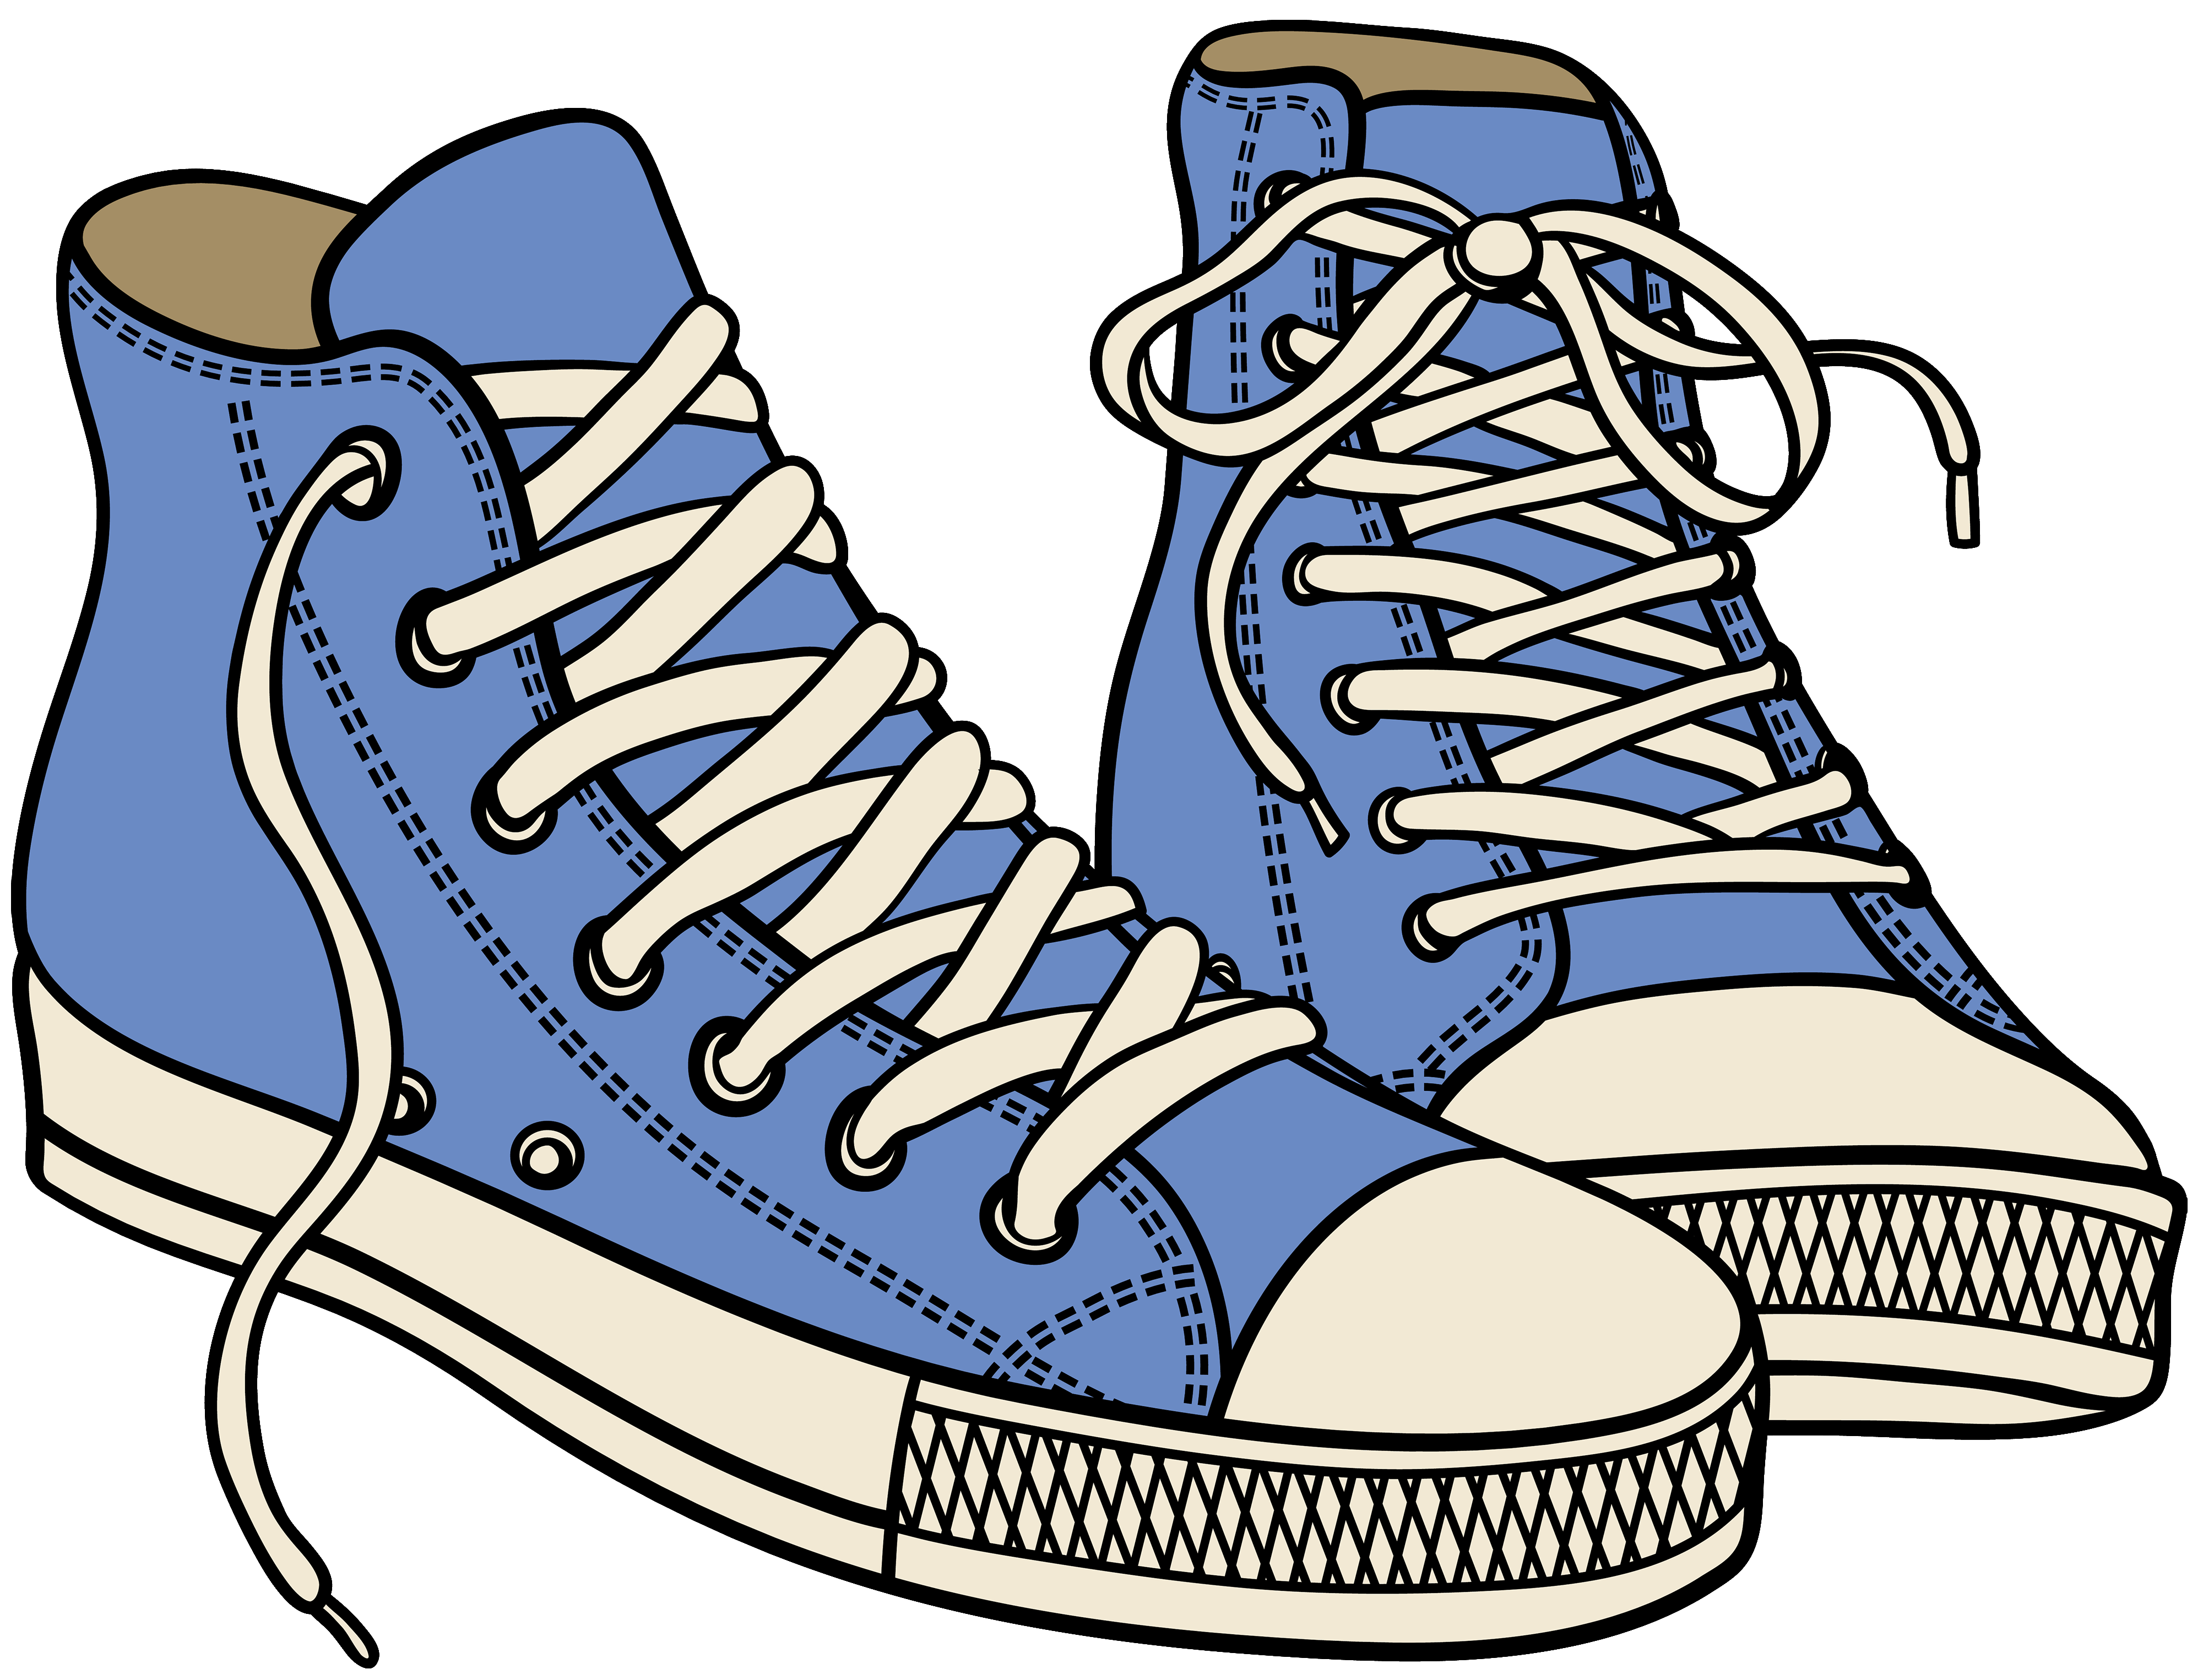 Chaussures converse